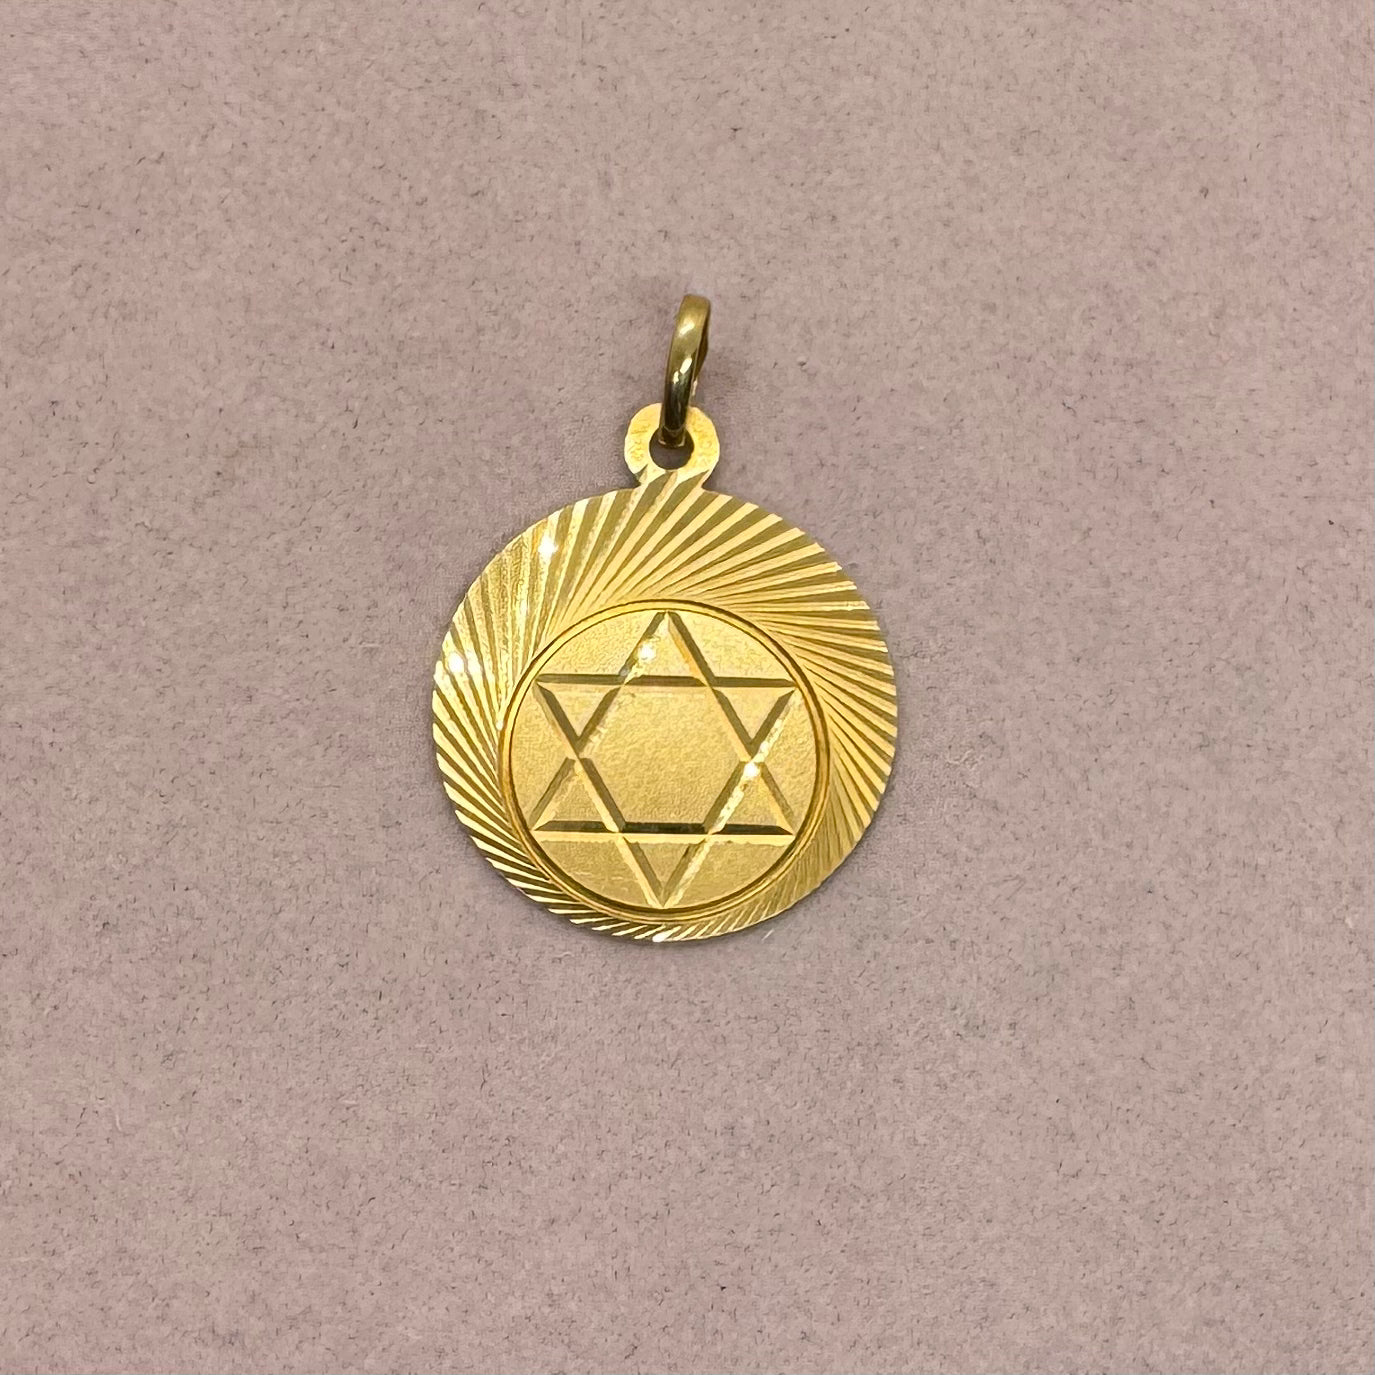 Radiant Star of David Medallion by Uno a Erre